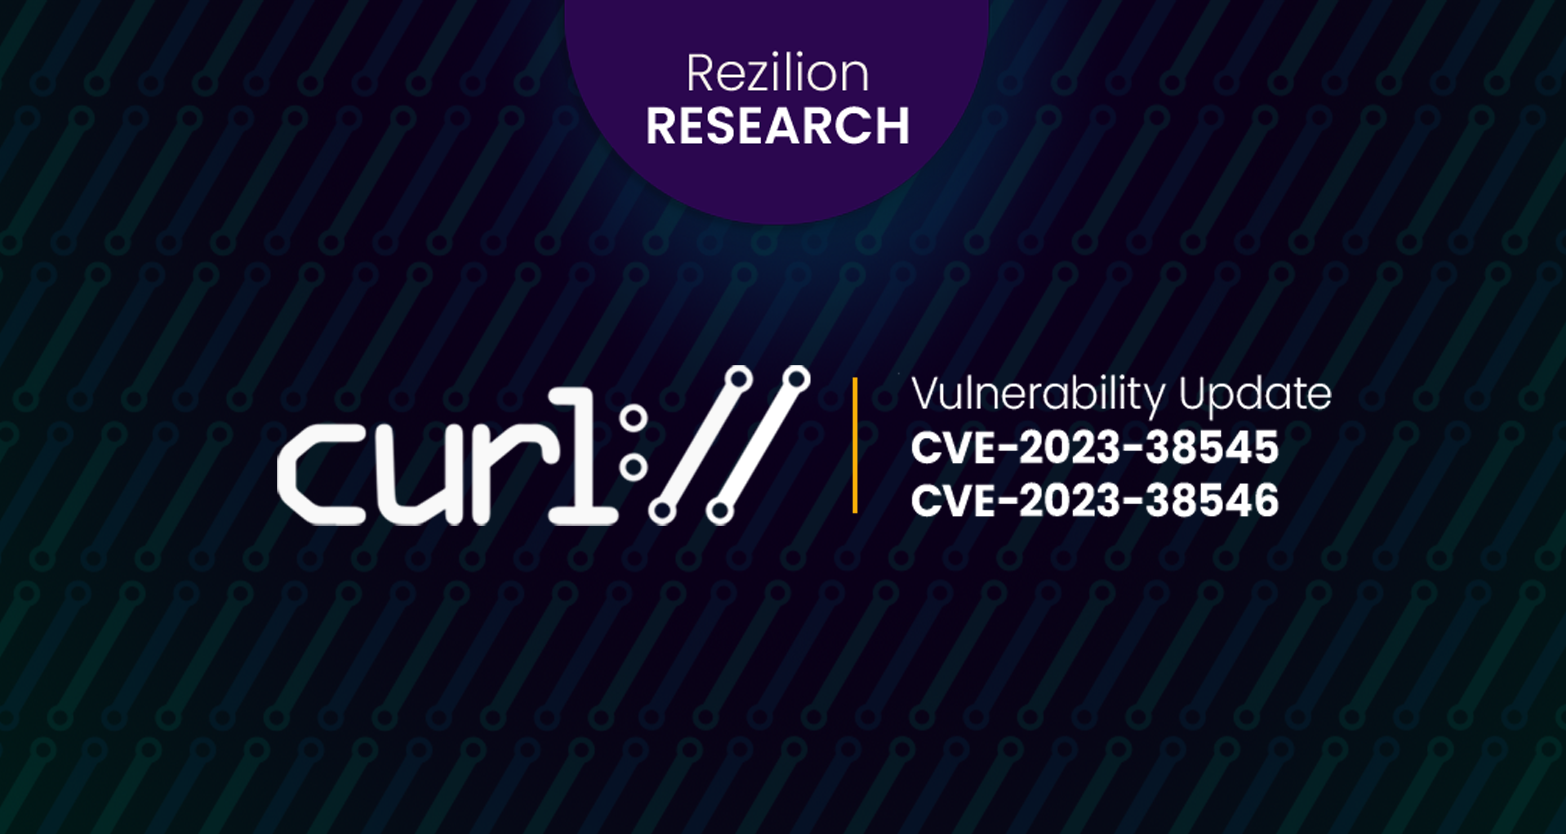 This blog post details the critical vulnerability in Curl